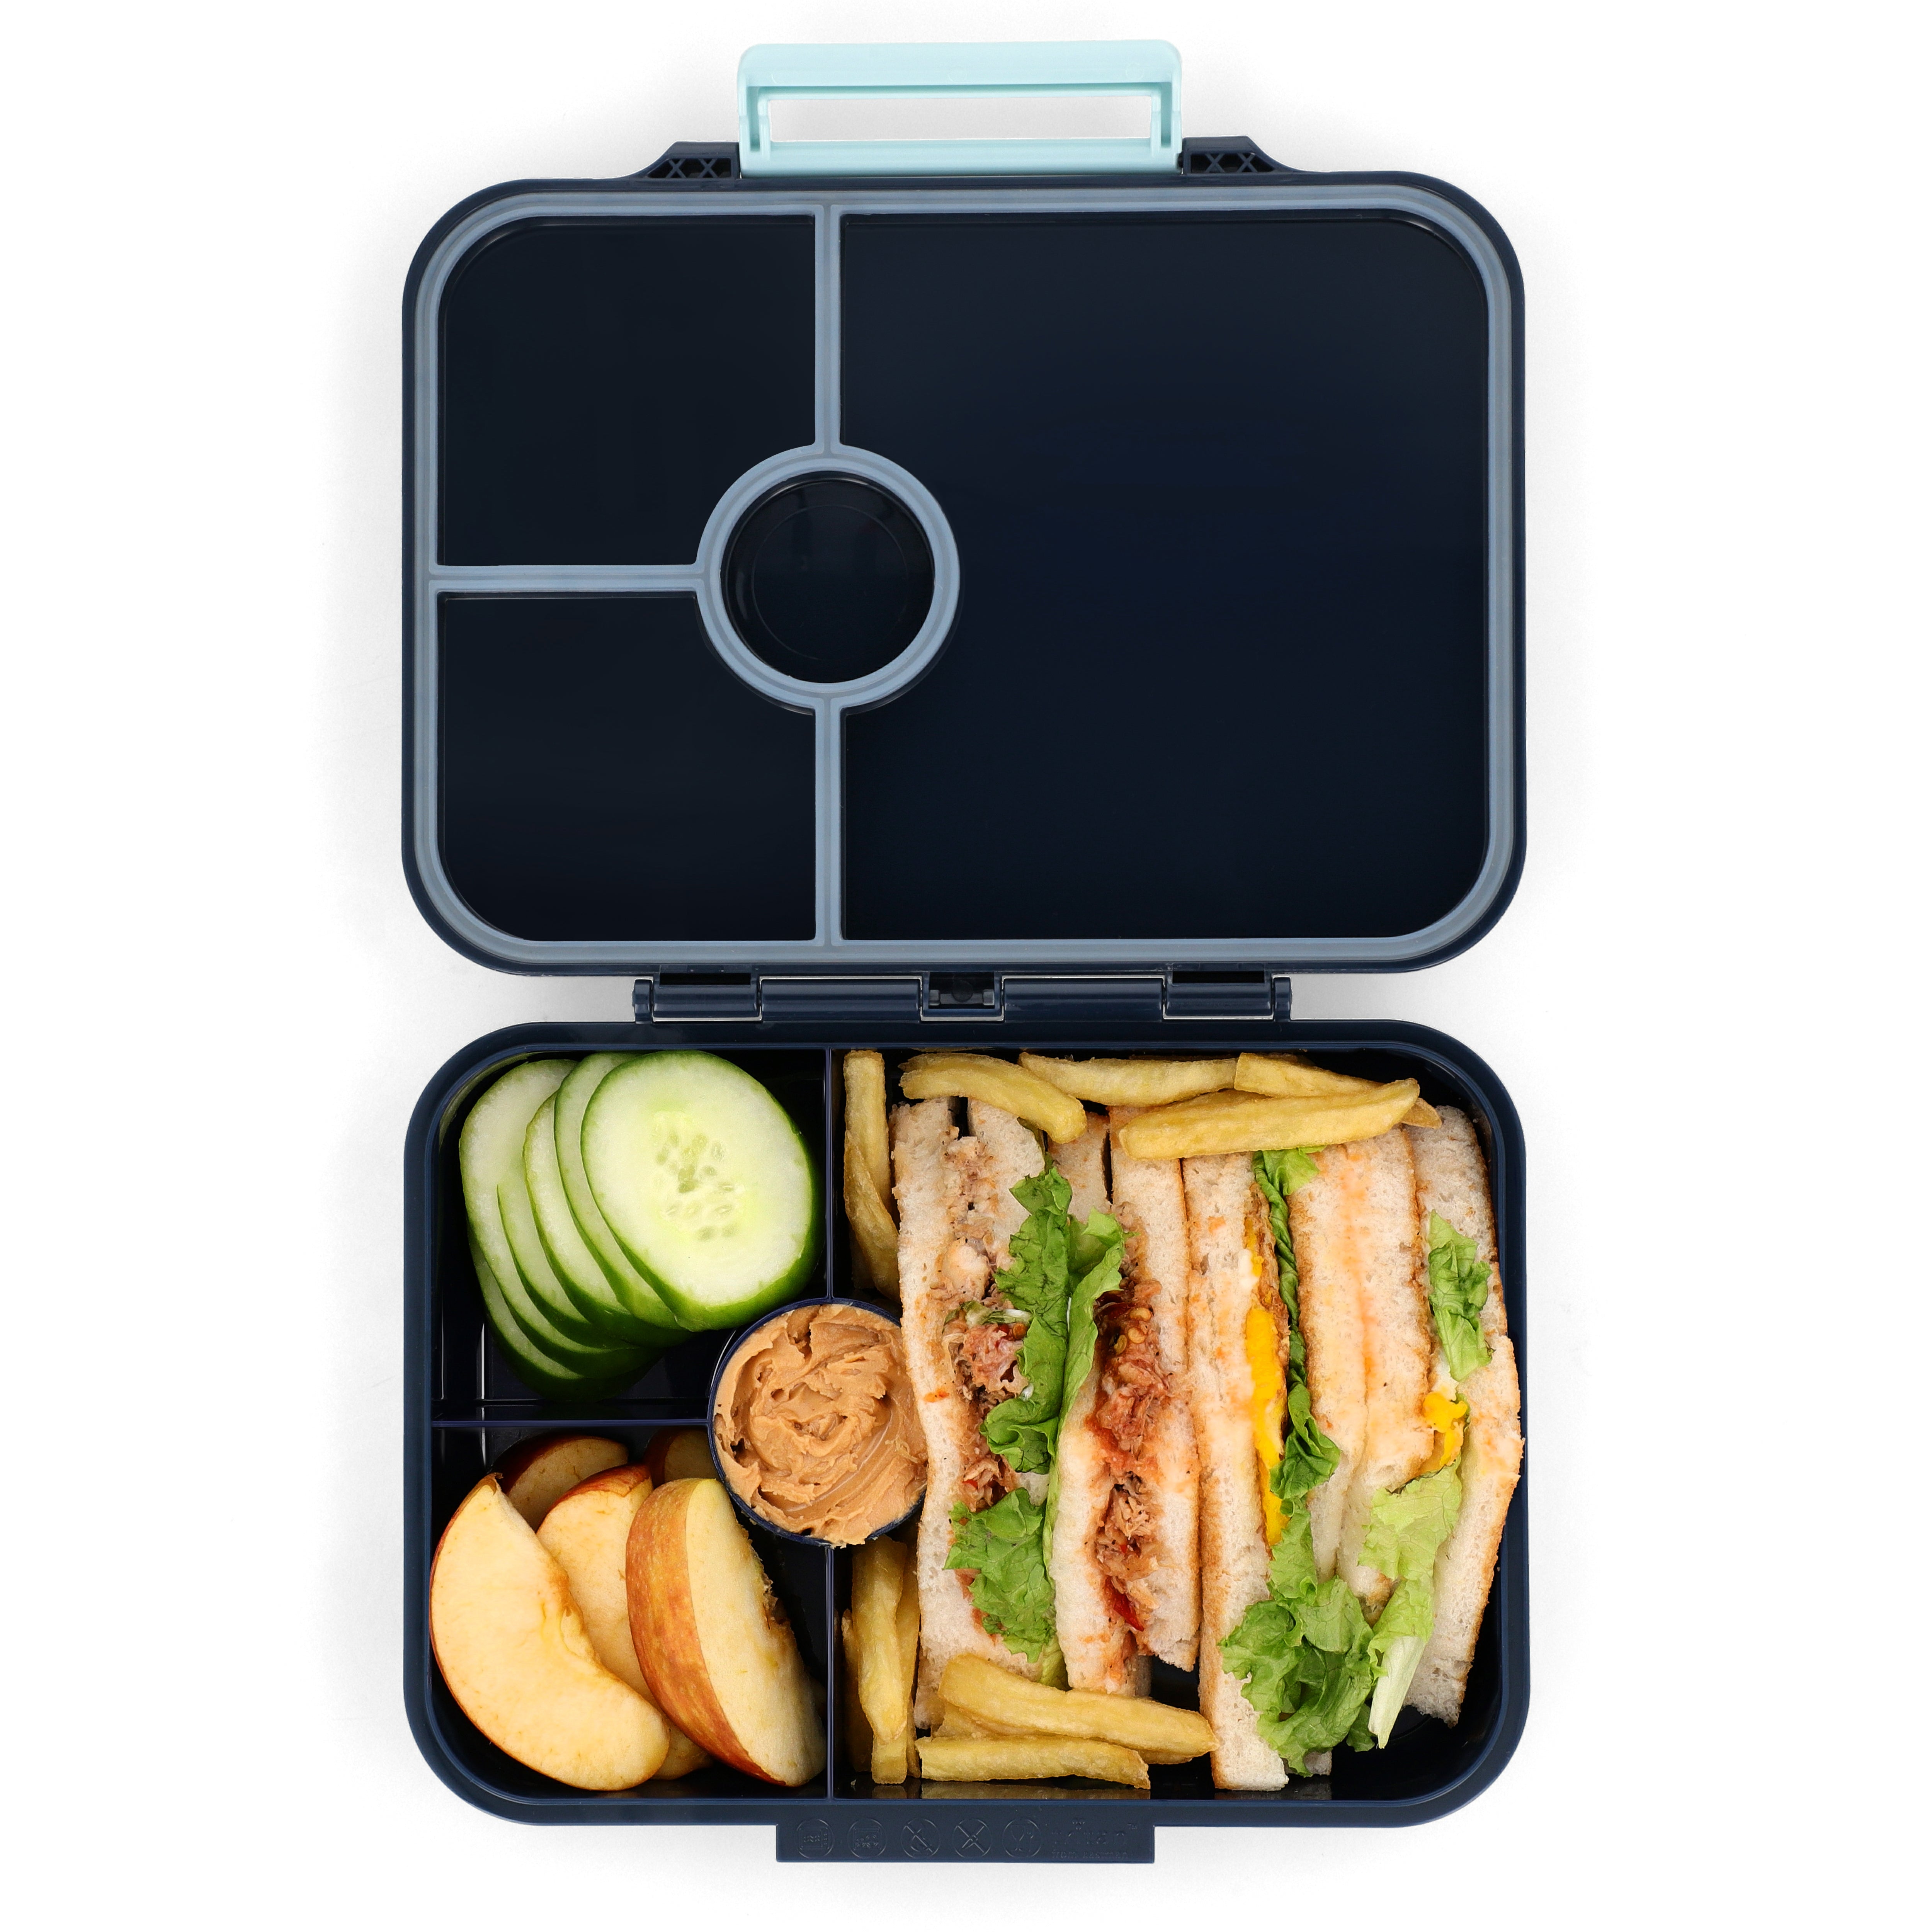 LeakProof Tritan Bento Box & Spill-Proof Insulated Water Bottle, Dishwasher Safe, BPA Free (Deep Blue - Space/Astronaut/Planets)